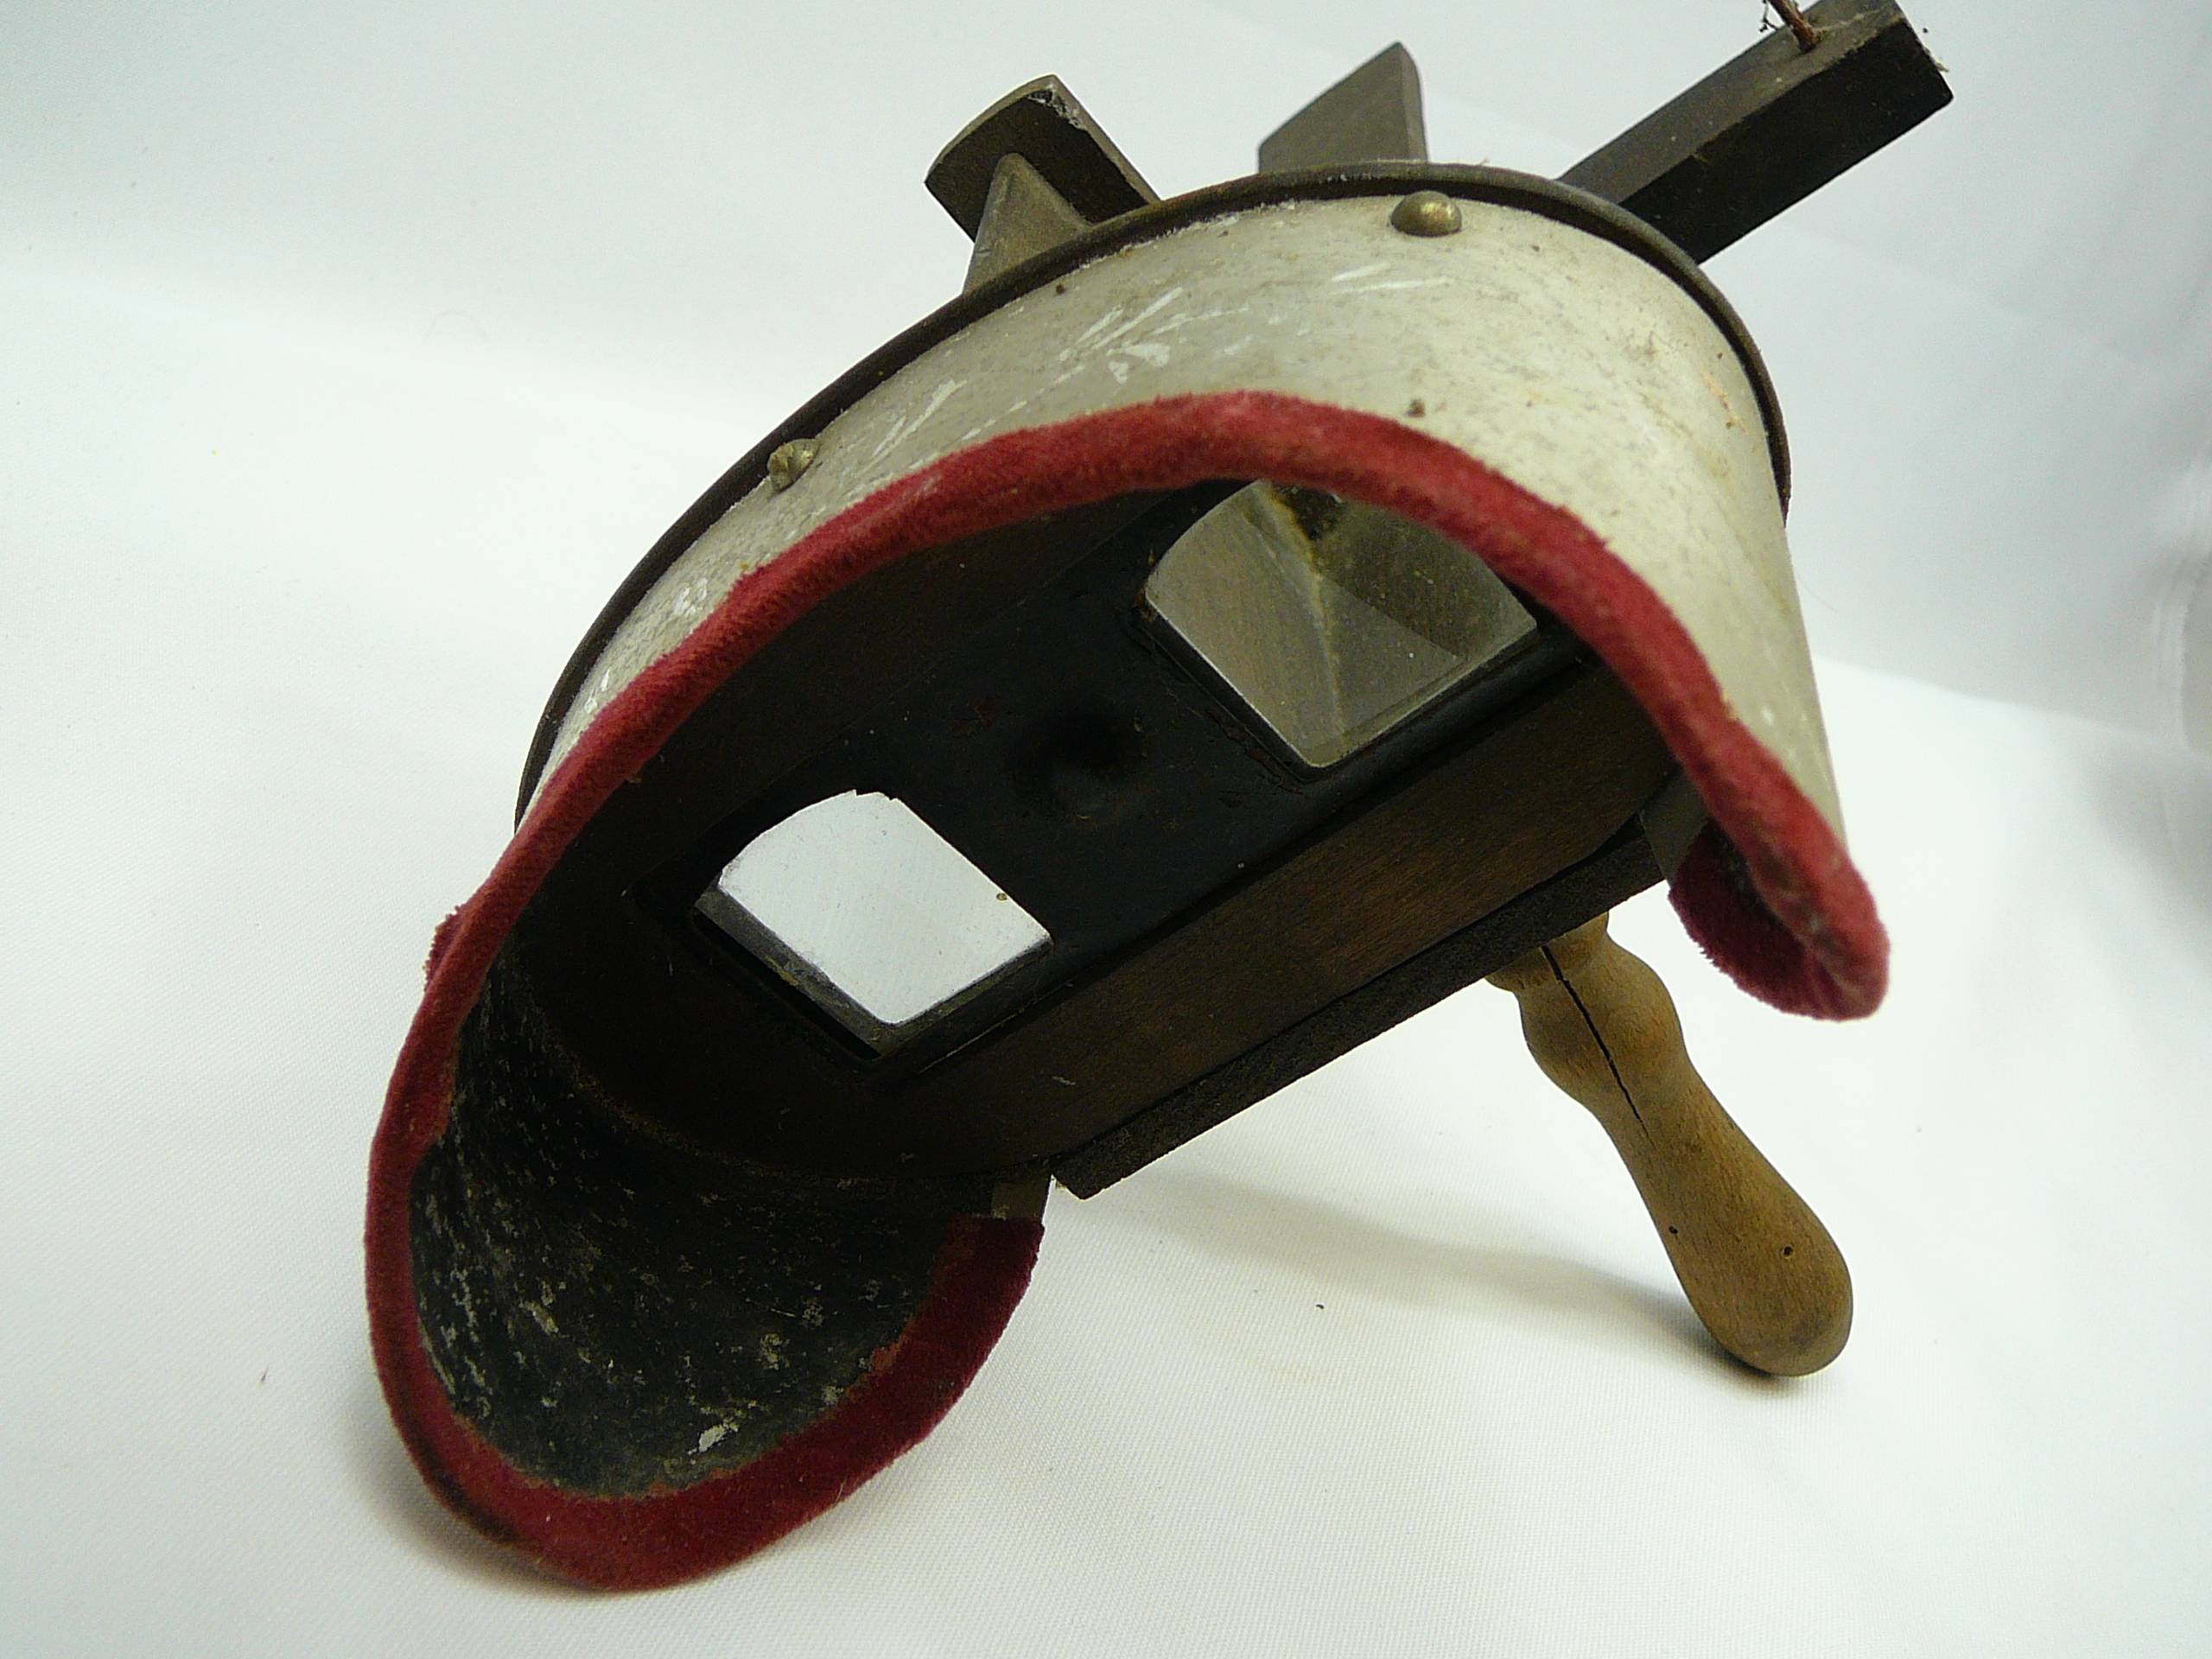 19th cent French Stereoscope